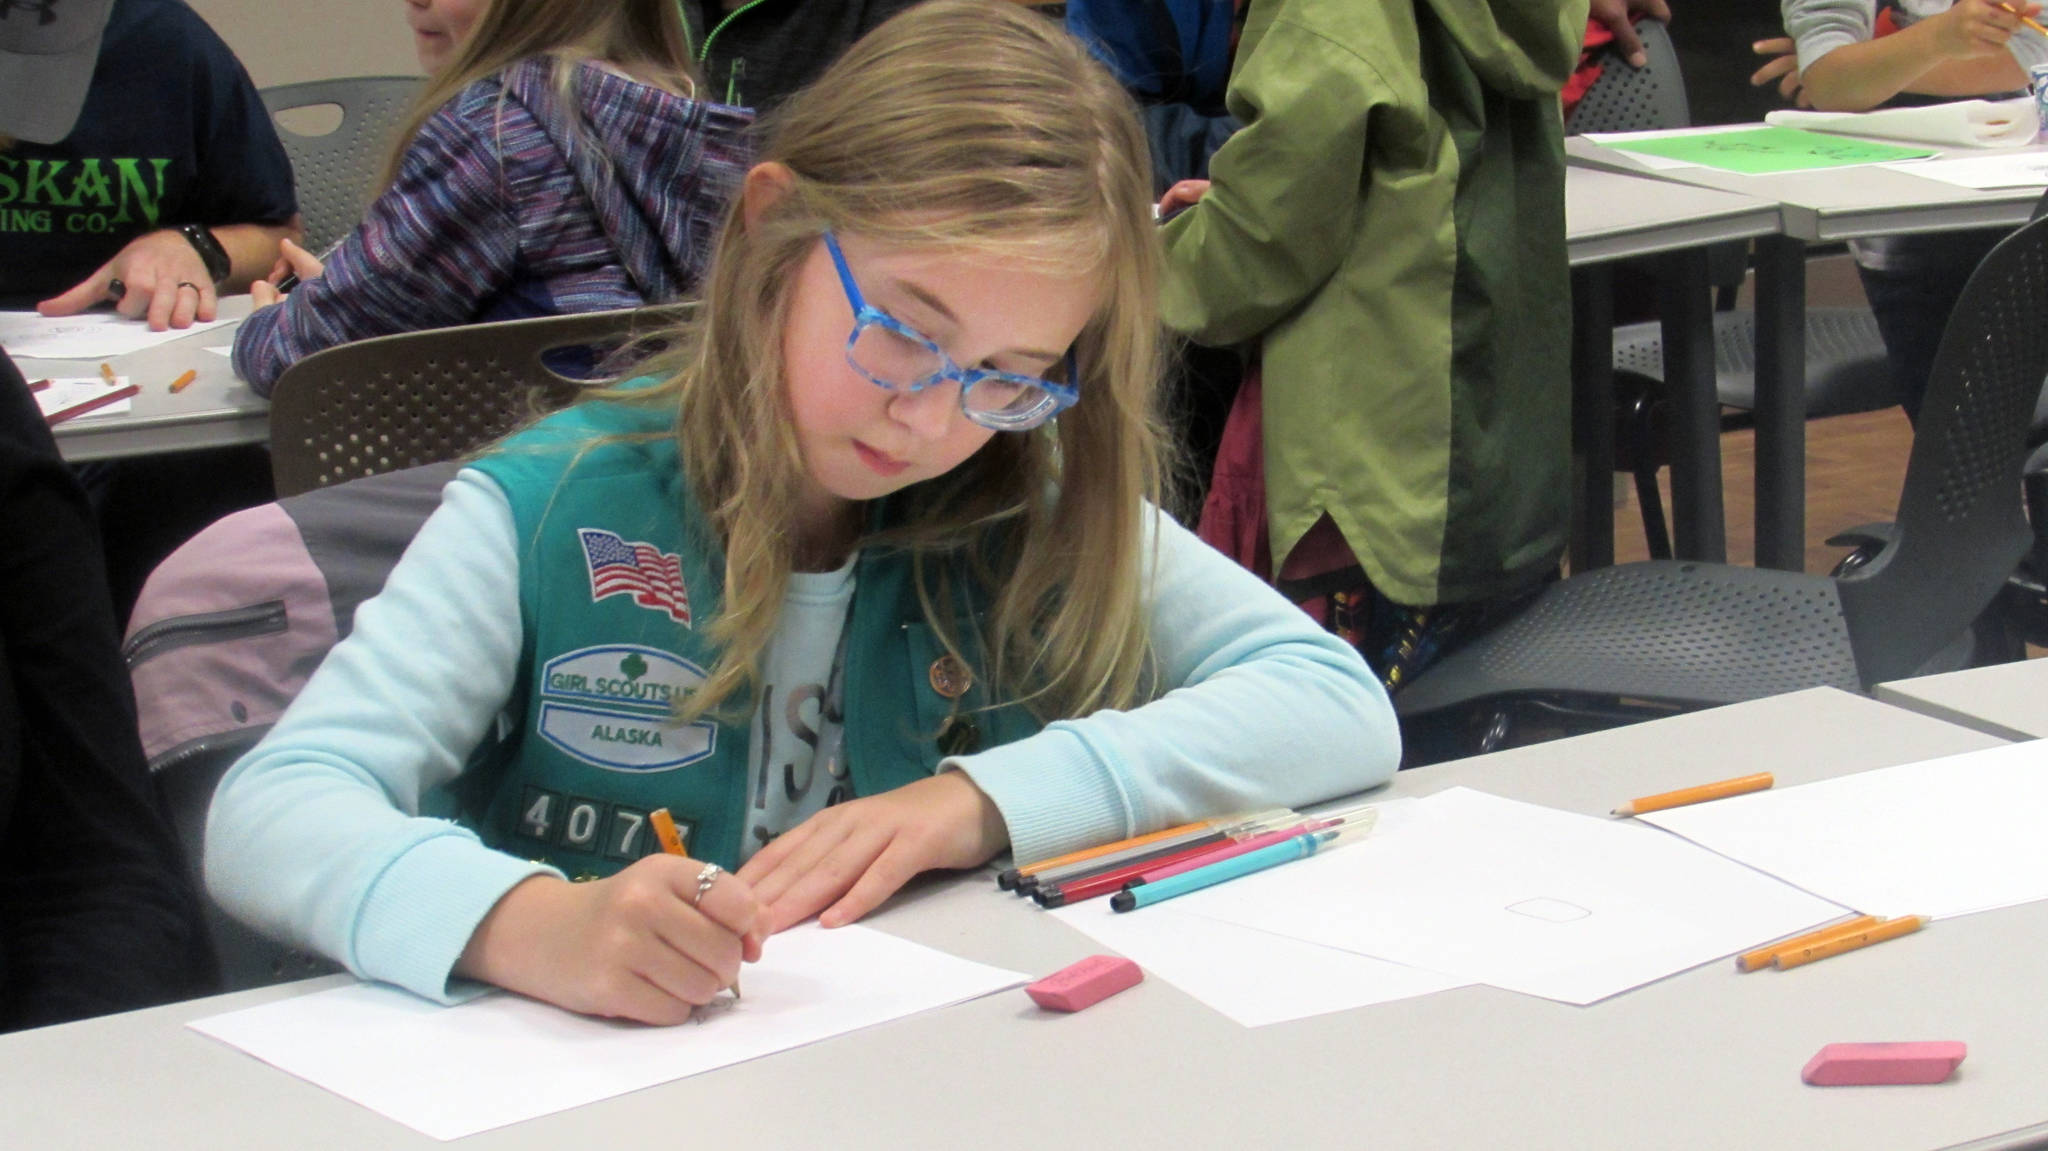 Farrah Fremlin, 8, said she finds coloring calming during a How to Make a Monster workshop with artist Glo Rameriz Saturday afternoon at Douglas Public Library. (Ben Hohenstatt | Capital City Weekly)